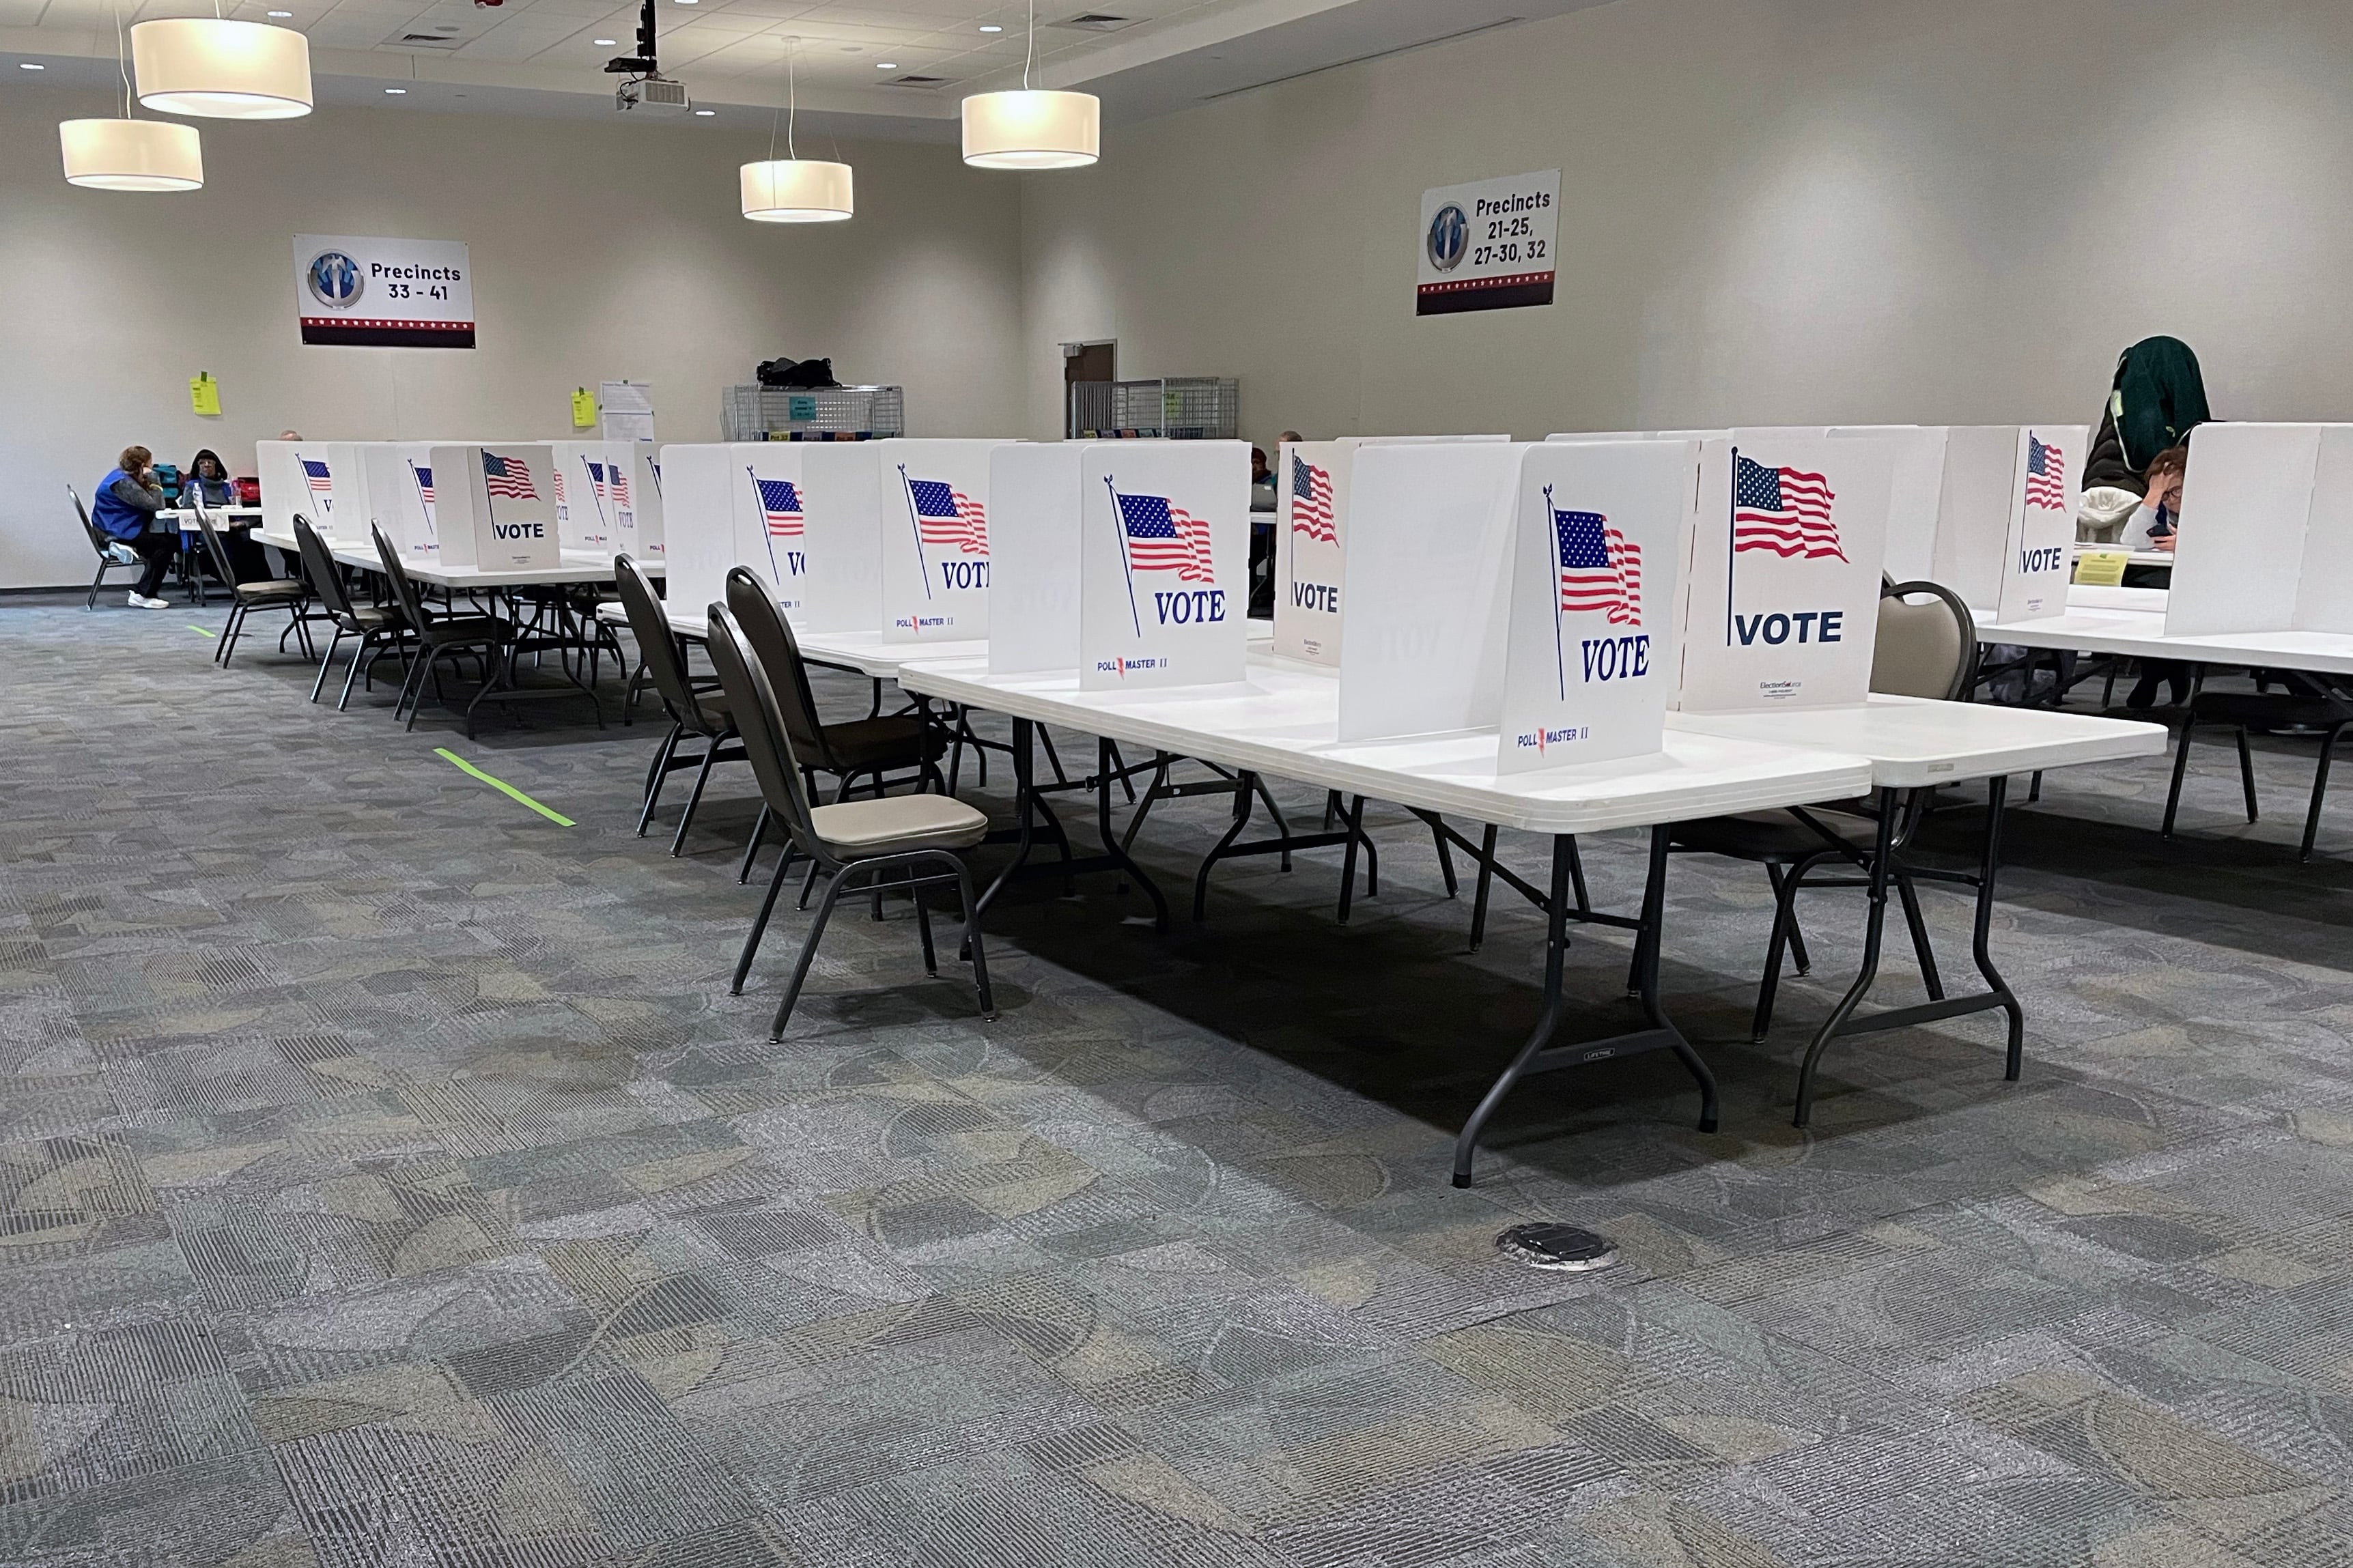 Cardboard dividers with the American flag and the word "Vote" line tables inside of a room with grey carpet.